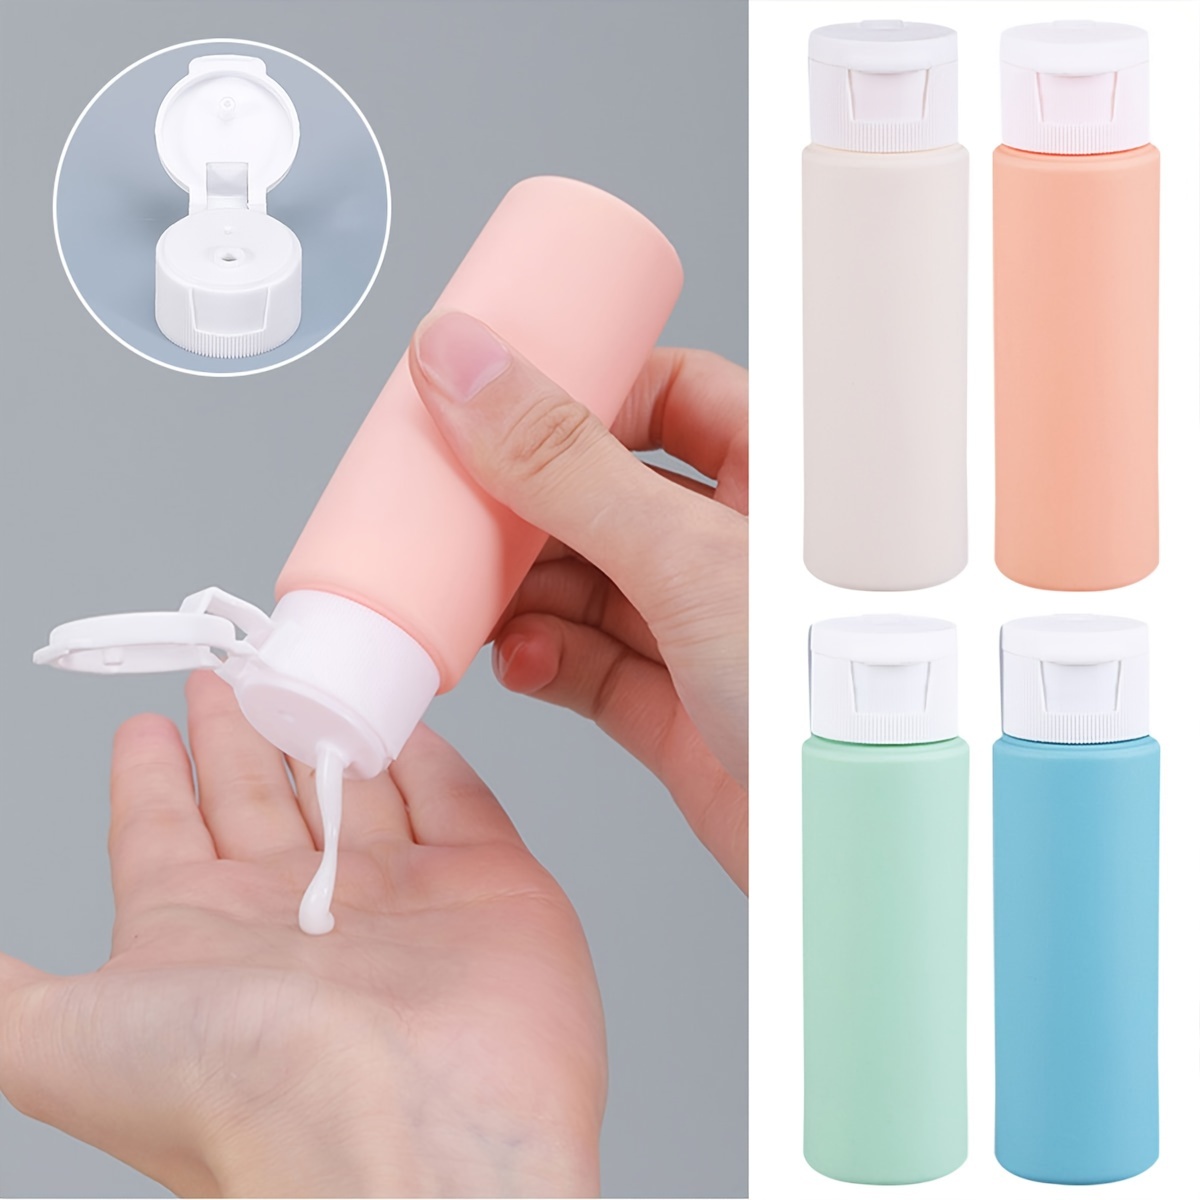 

Leak-proof Silicone Travel Bottle Set - Refillable & Squeezable Containers For Shampoo, Lotion, Toiletries - Alcohol-free, Oval-shaped, Hand Wash Only - Pink, Blue, Beige, Green - 4x1.1inch